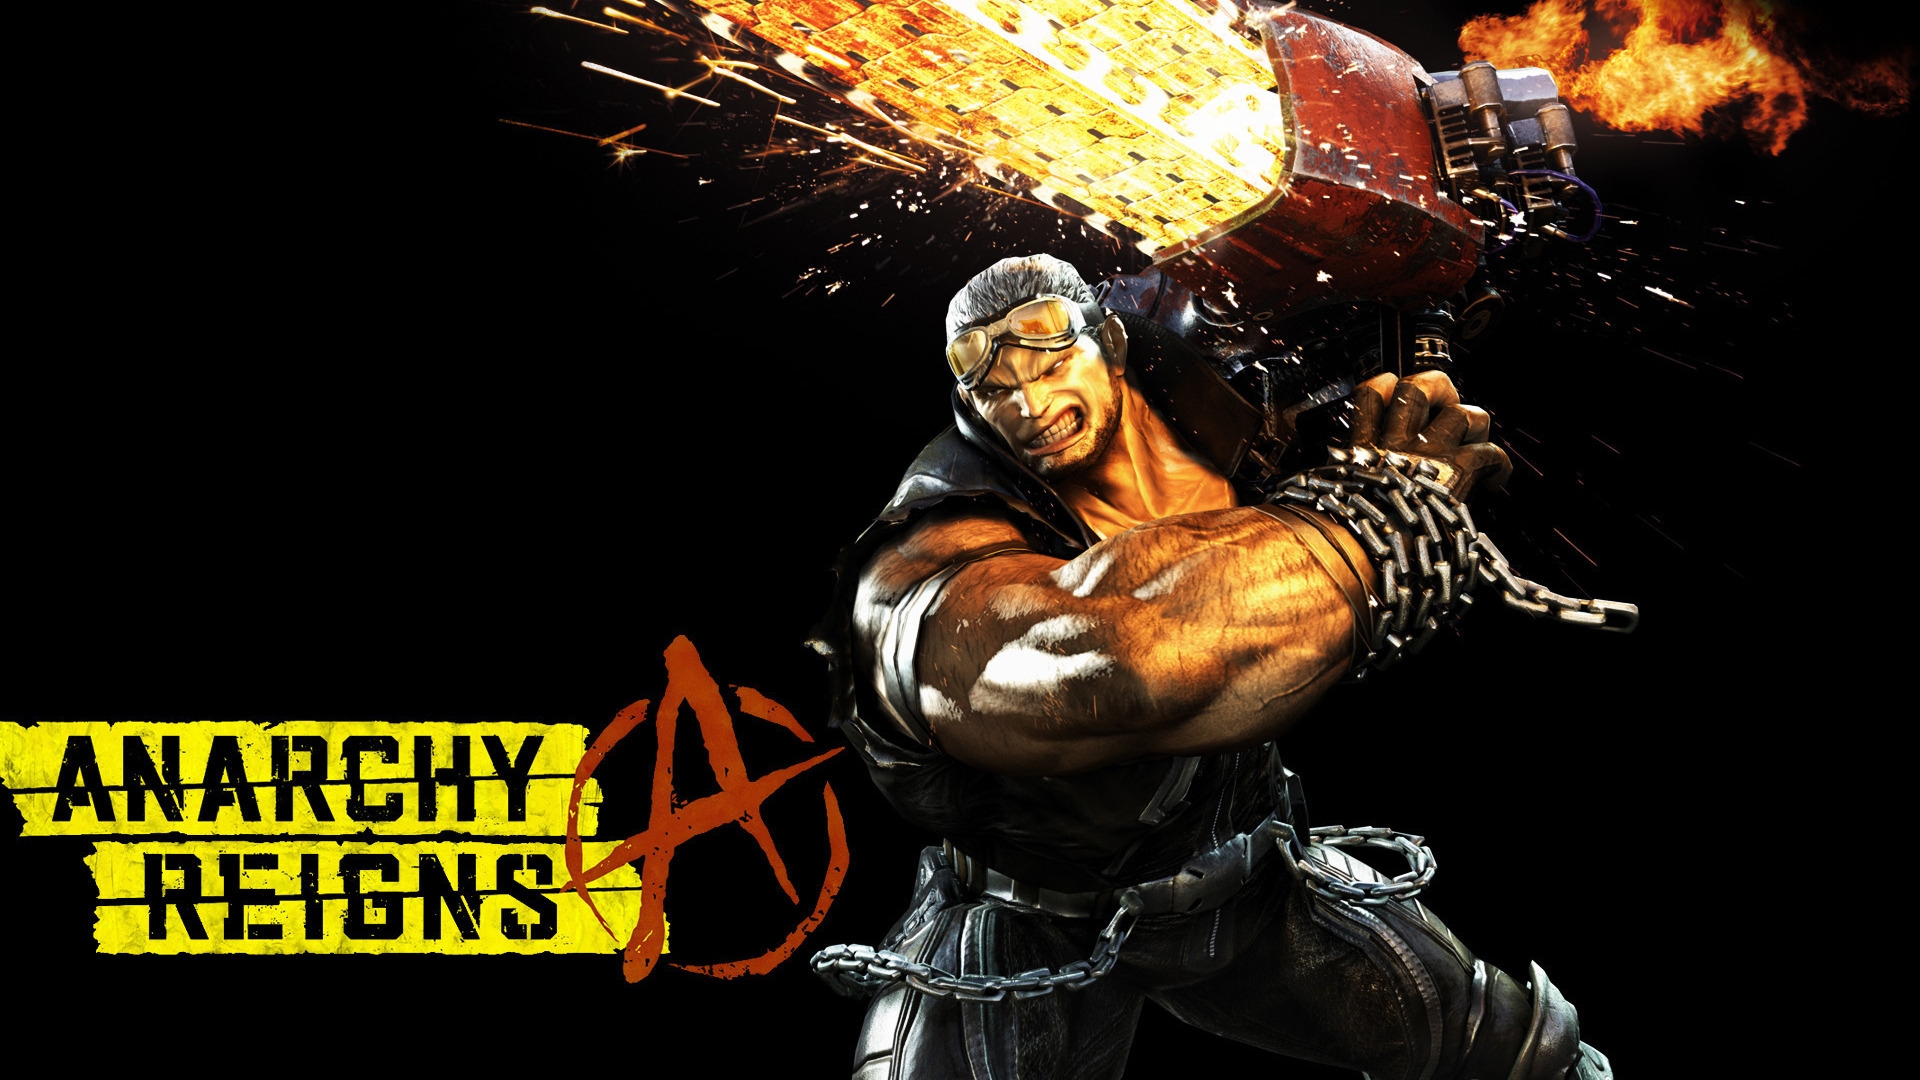 Anarchy Reigns 2013 for 1920 x 1080 HDTV 1080p resolution